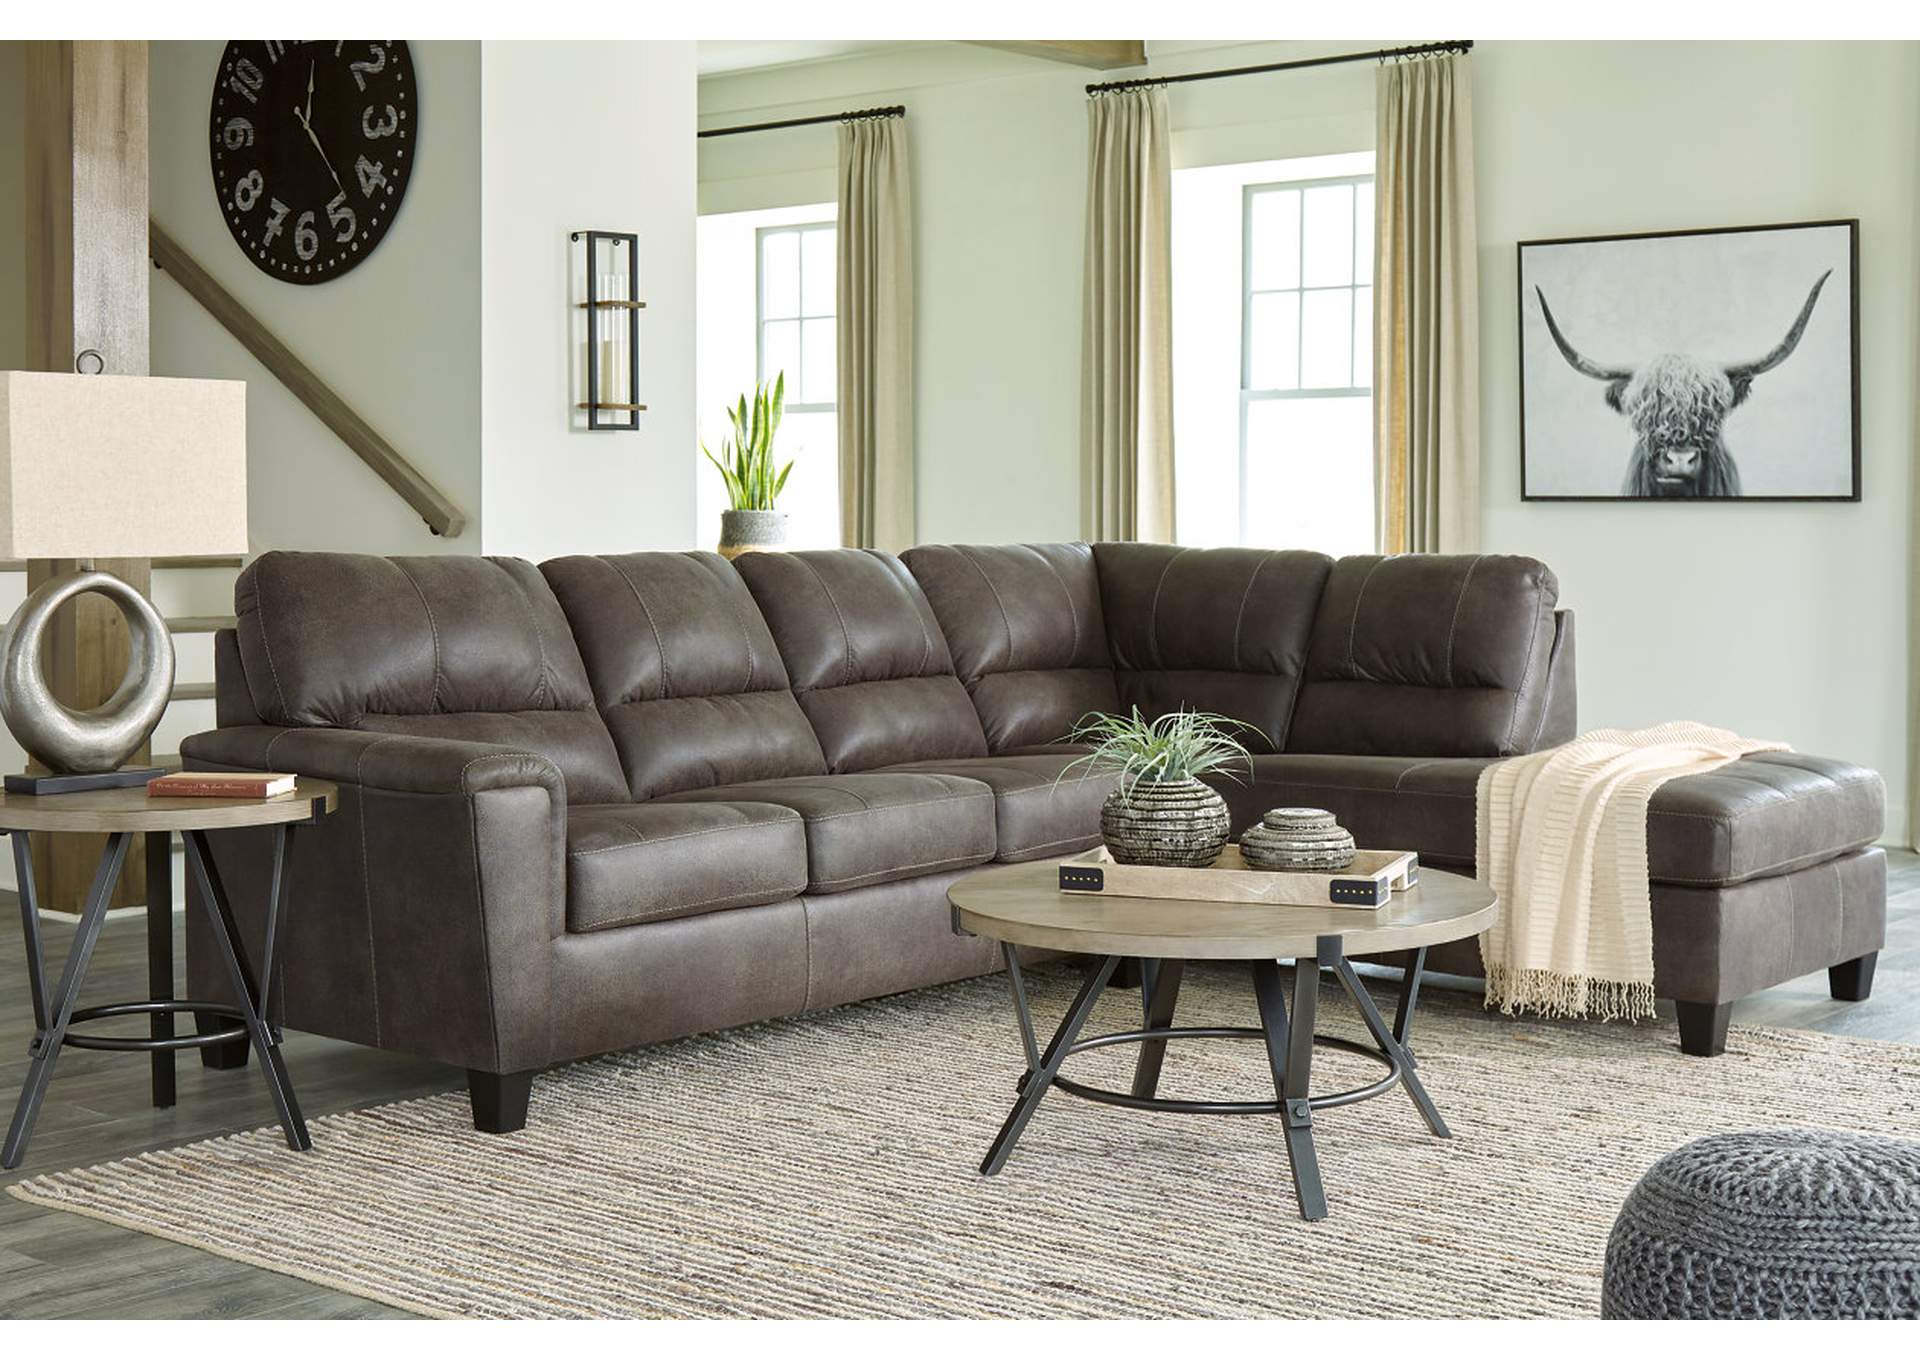 Navi 2-Piece Sleeper Sectional with Chaise,Signature Design By Ashley